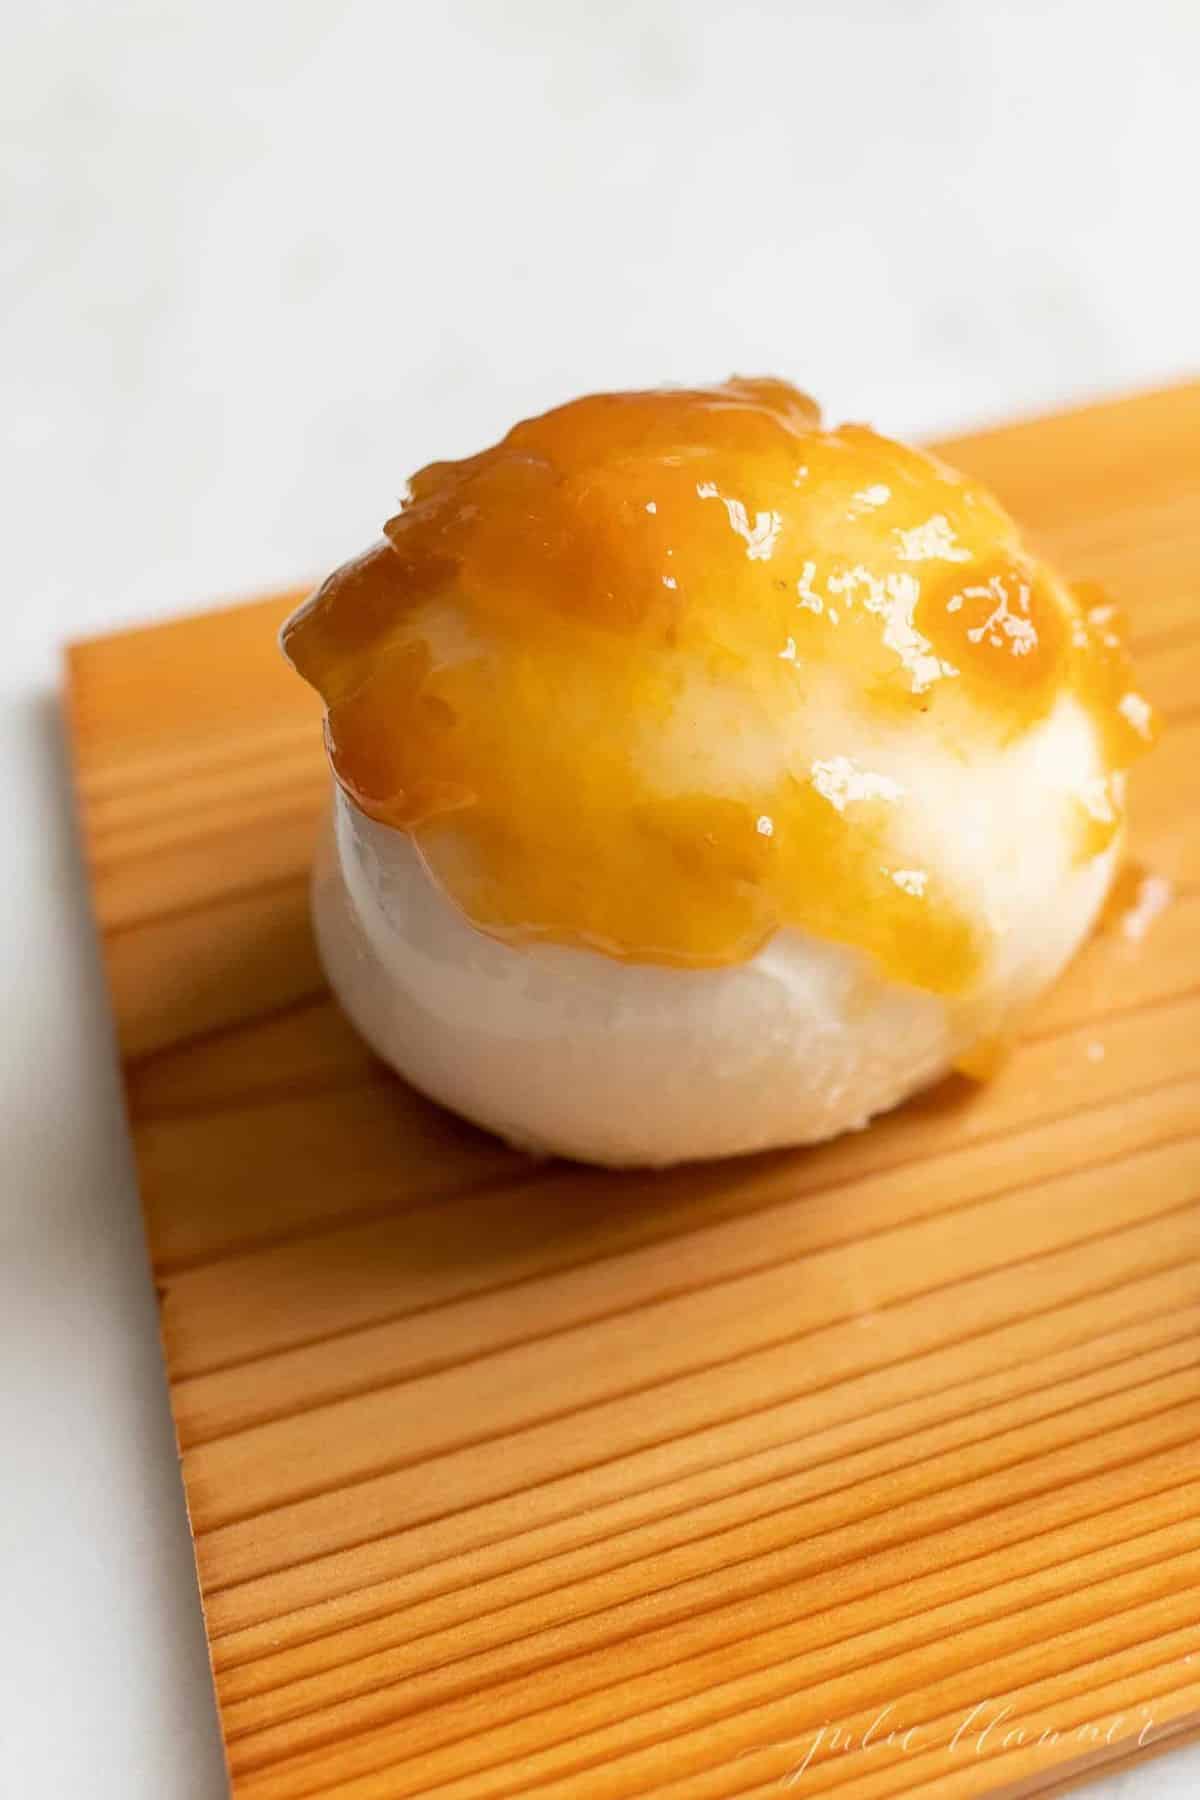 A grilled mozzarella appetizer covered in peach preserved on a cedar plank.